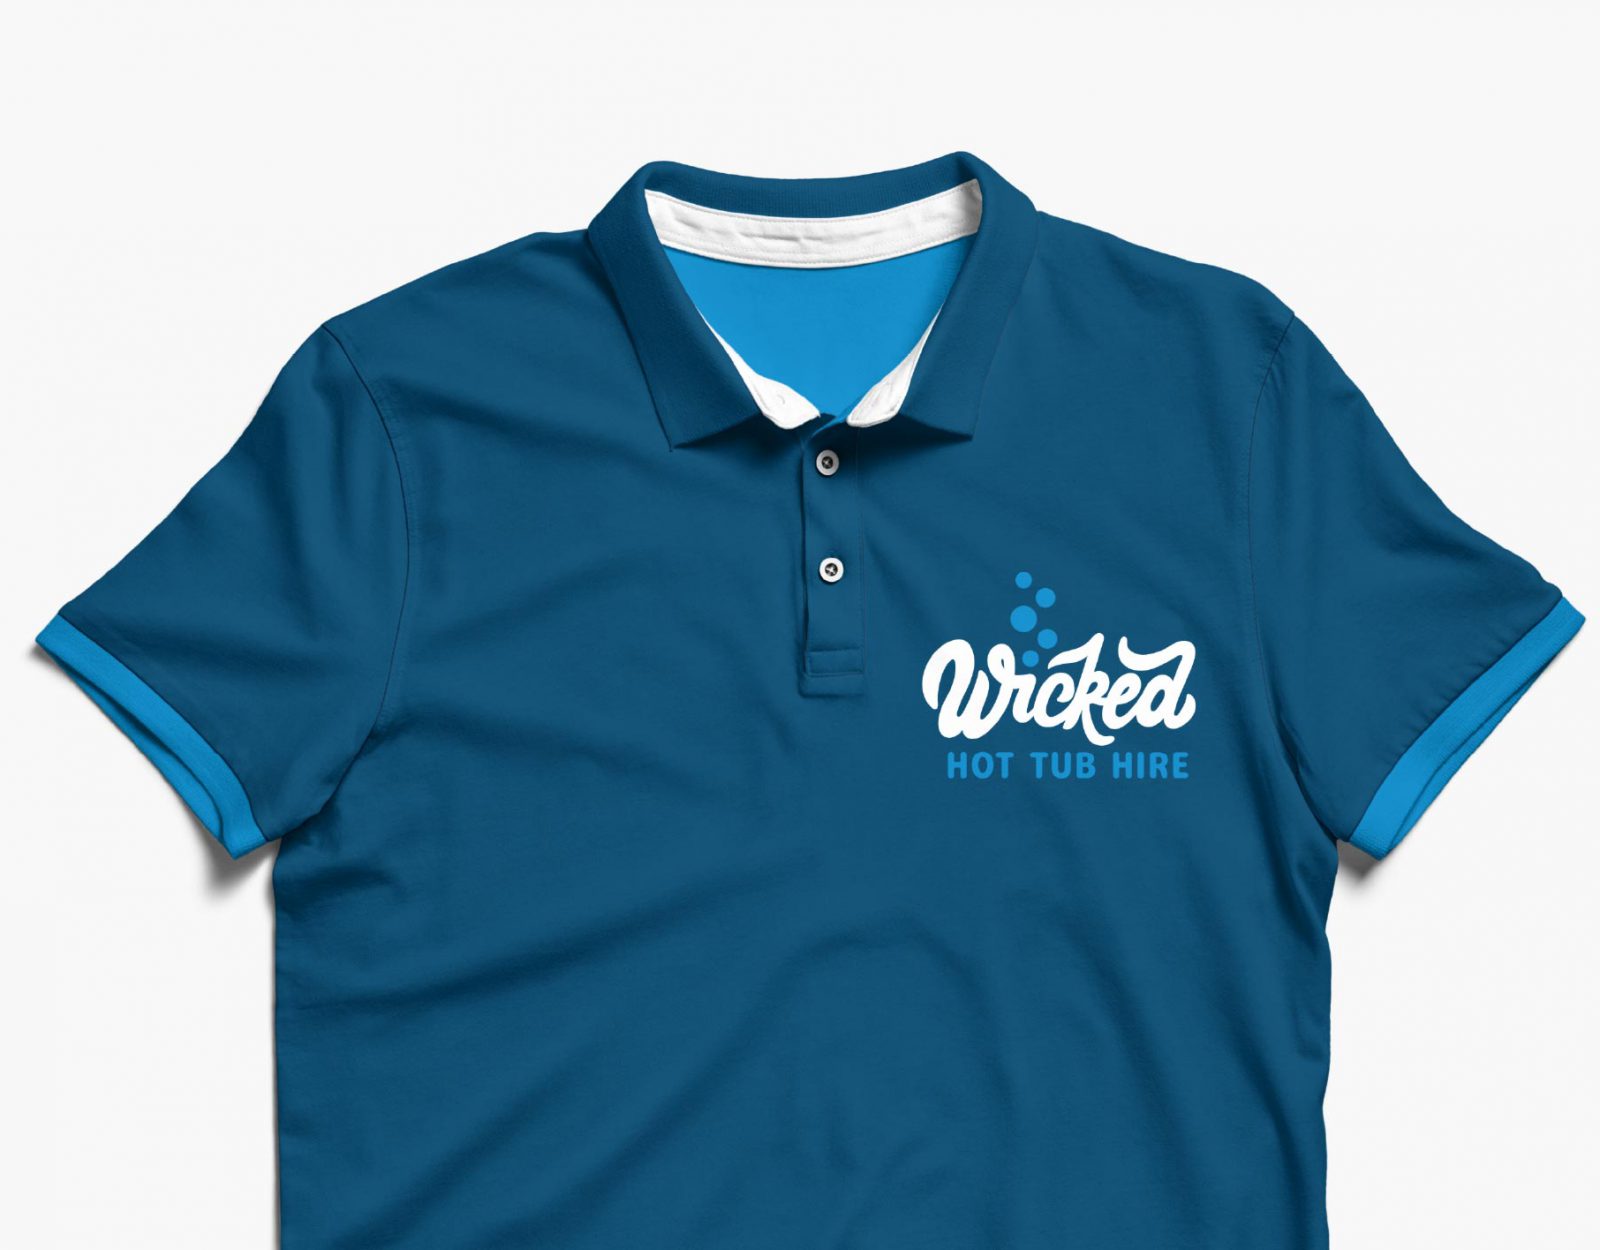 Wicked Hot Tub Hire shirt